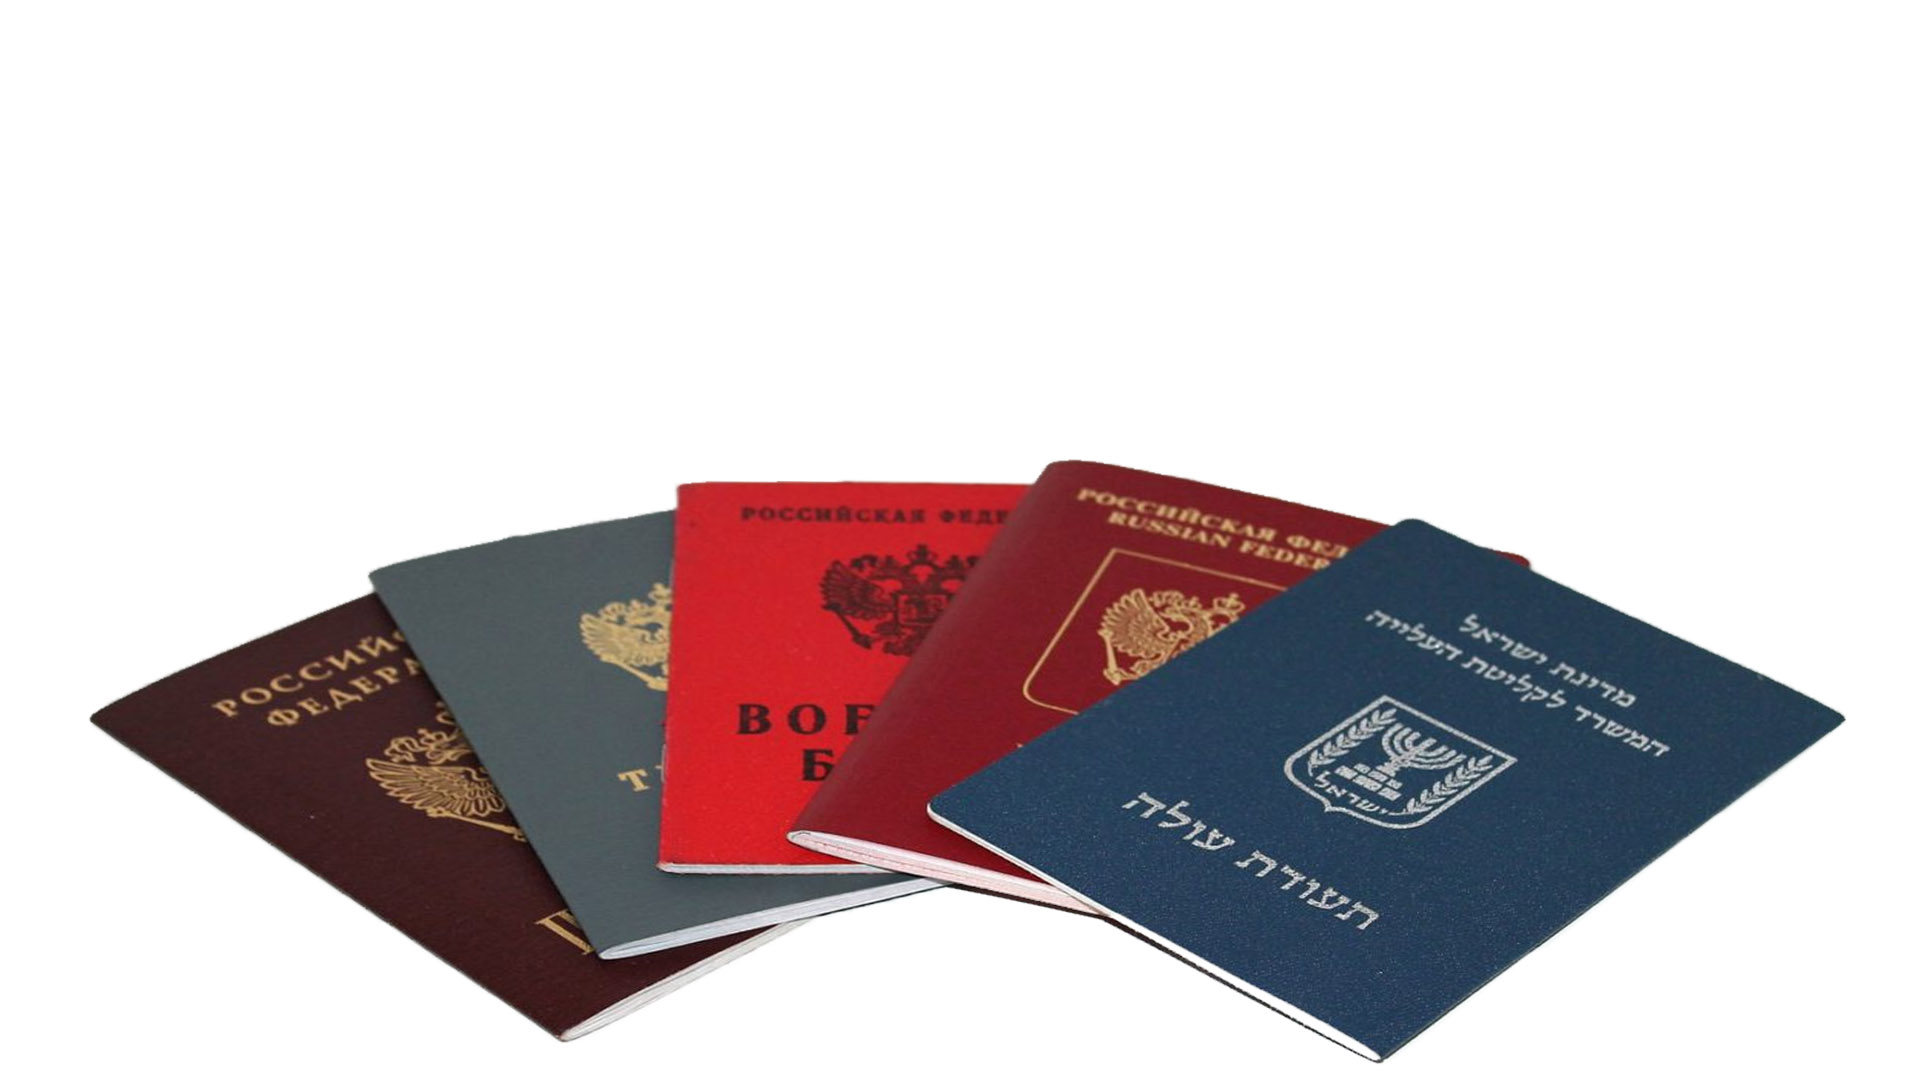 The three alternatives for getting a second legal passport